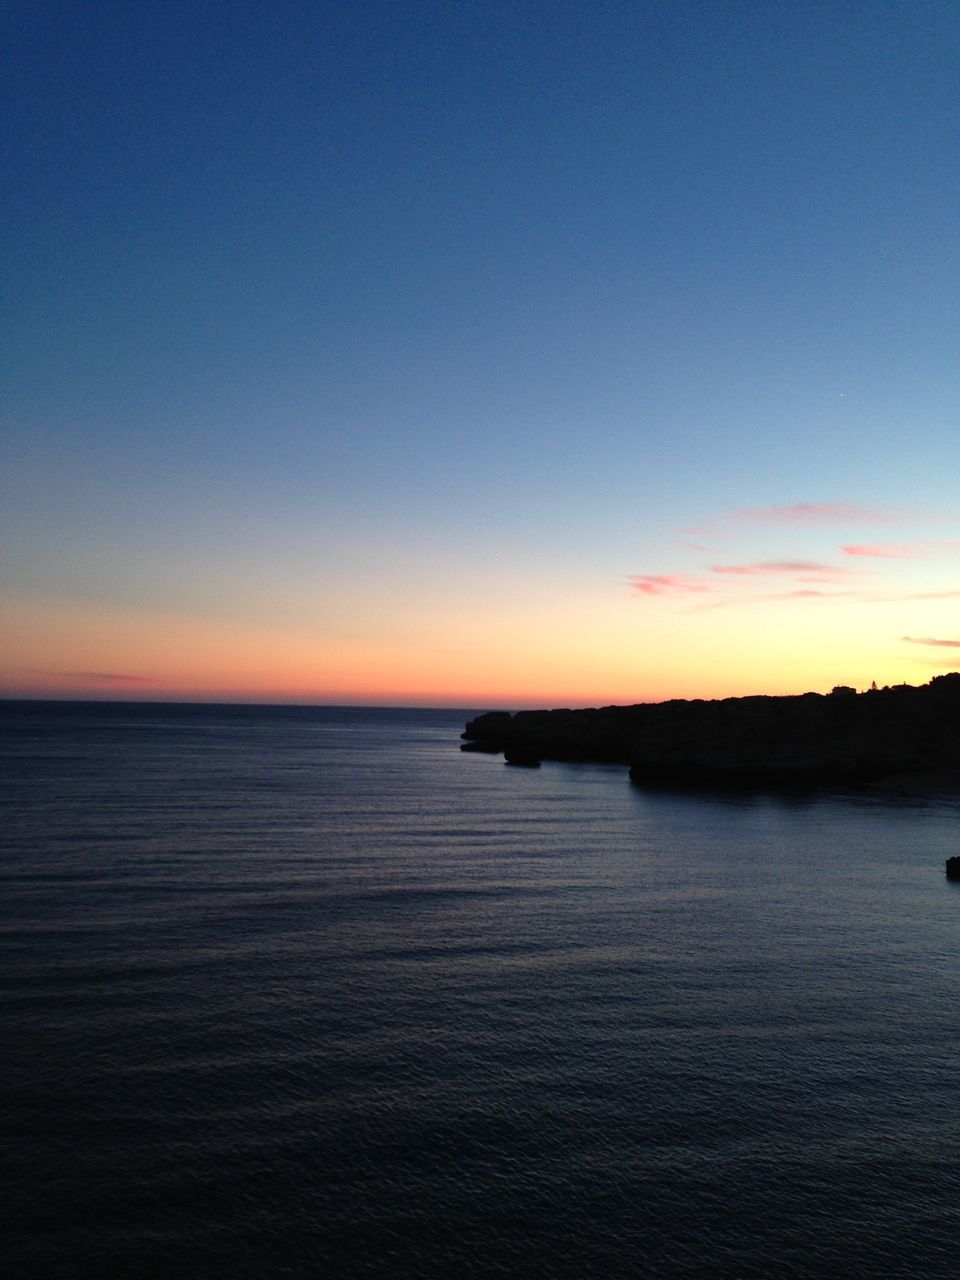 VIEW OF CALM SEA AT SUNSET